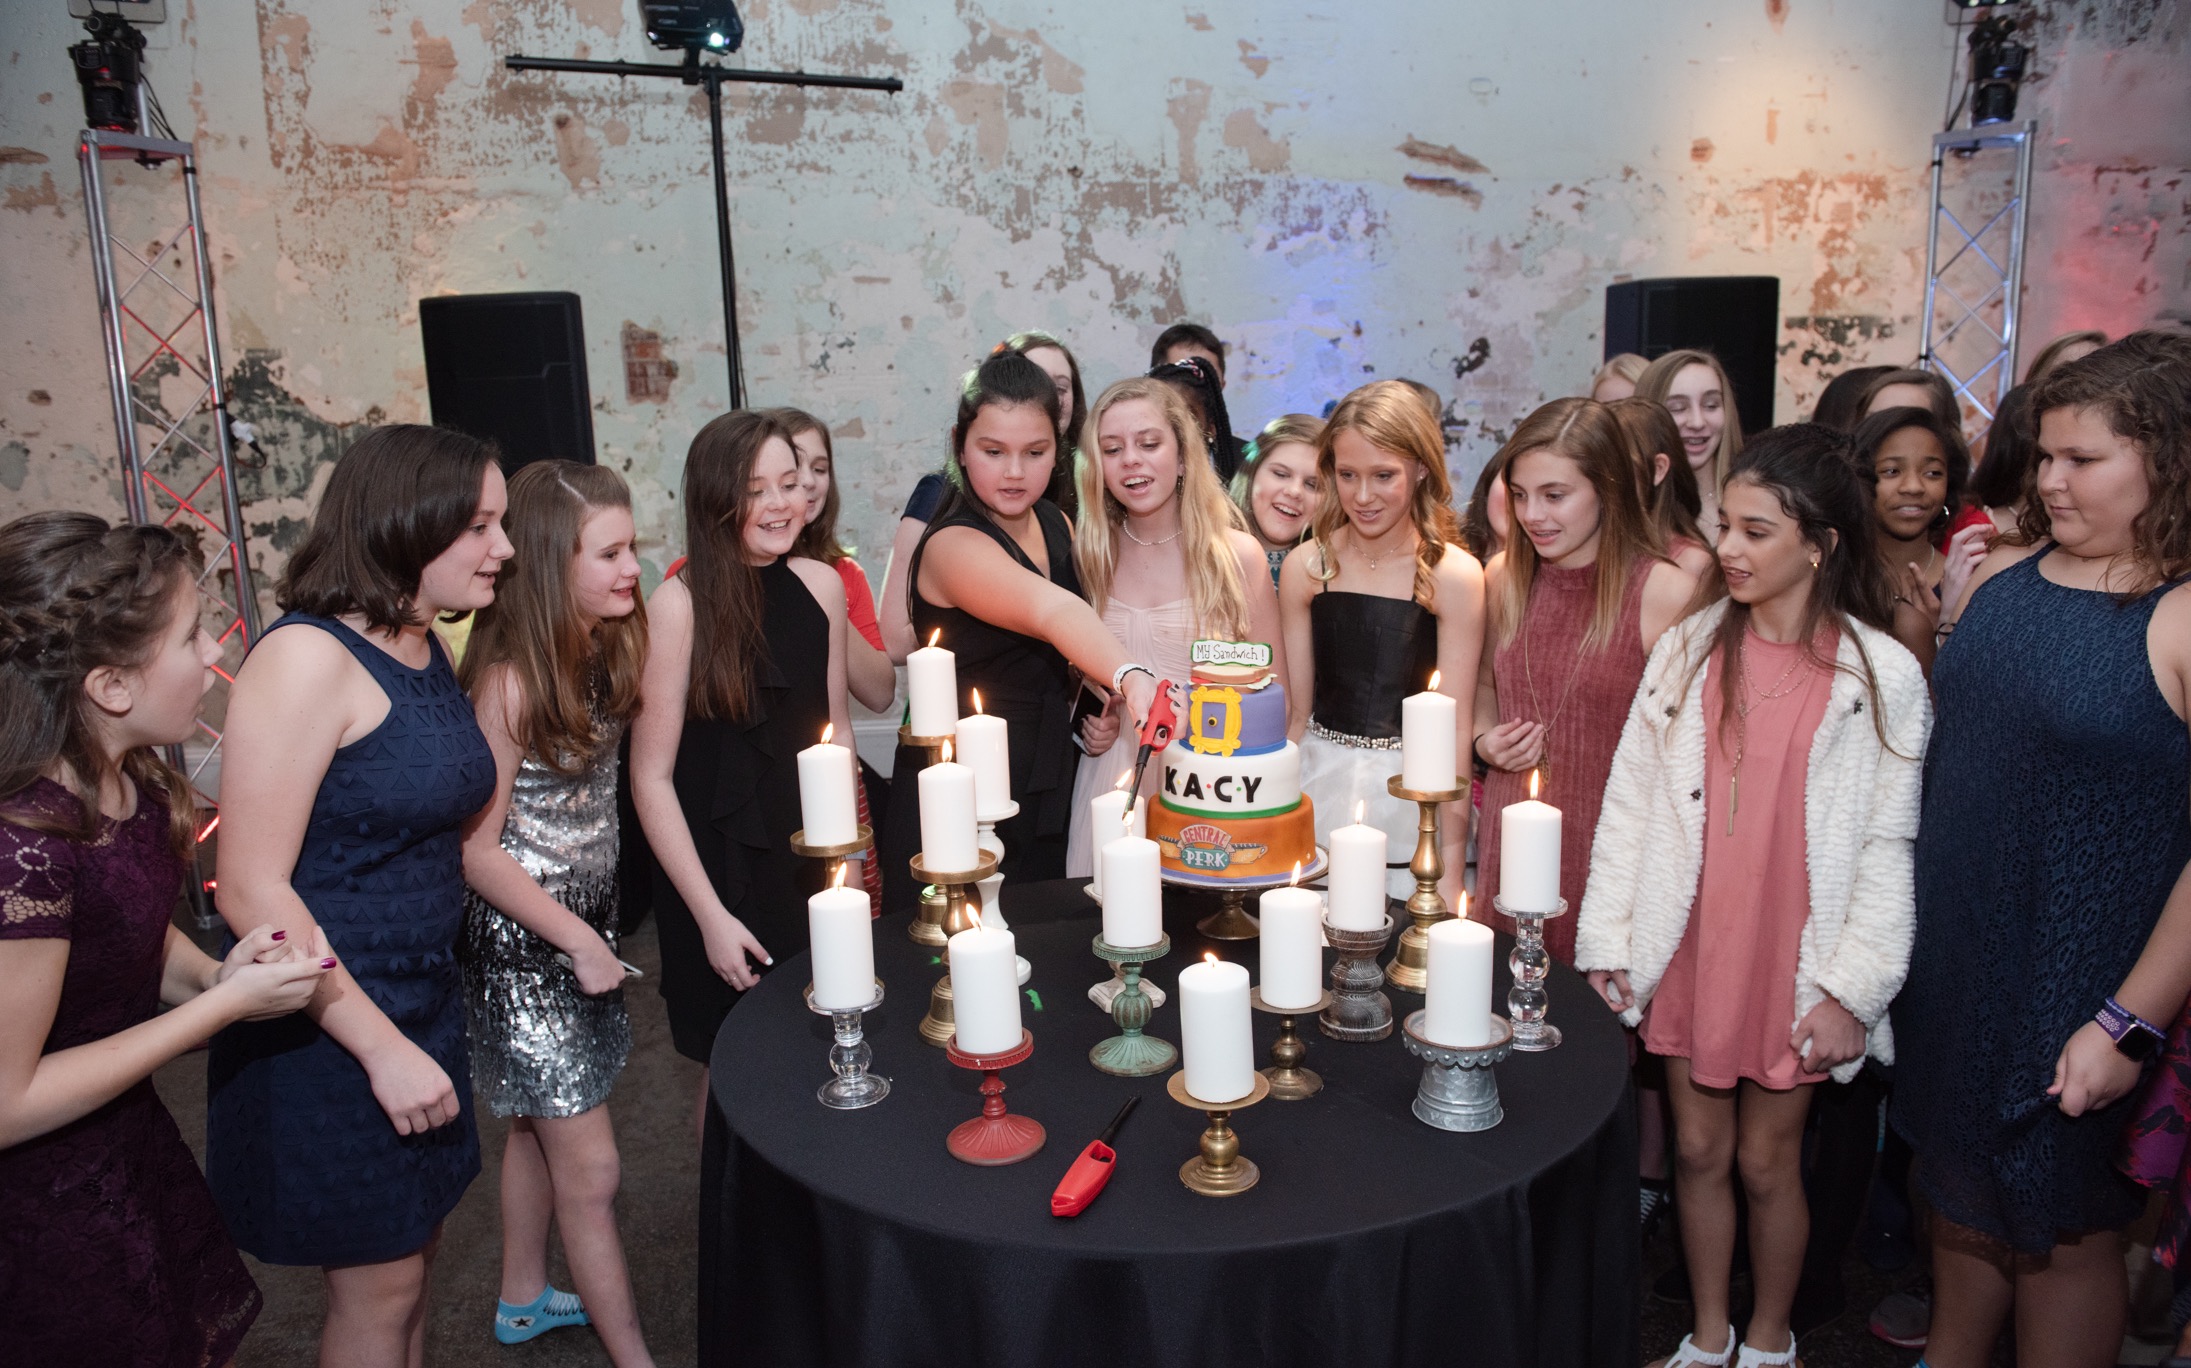 A candle-lighting ceremony is traditionally held during the bat mitzvah festivities in order to recognize family and friends who have had an impact on the celebrant. Kacy invites her friends to light a candle.